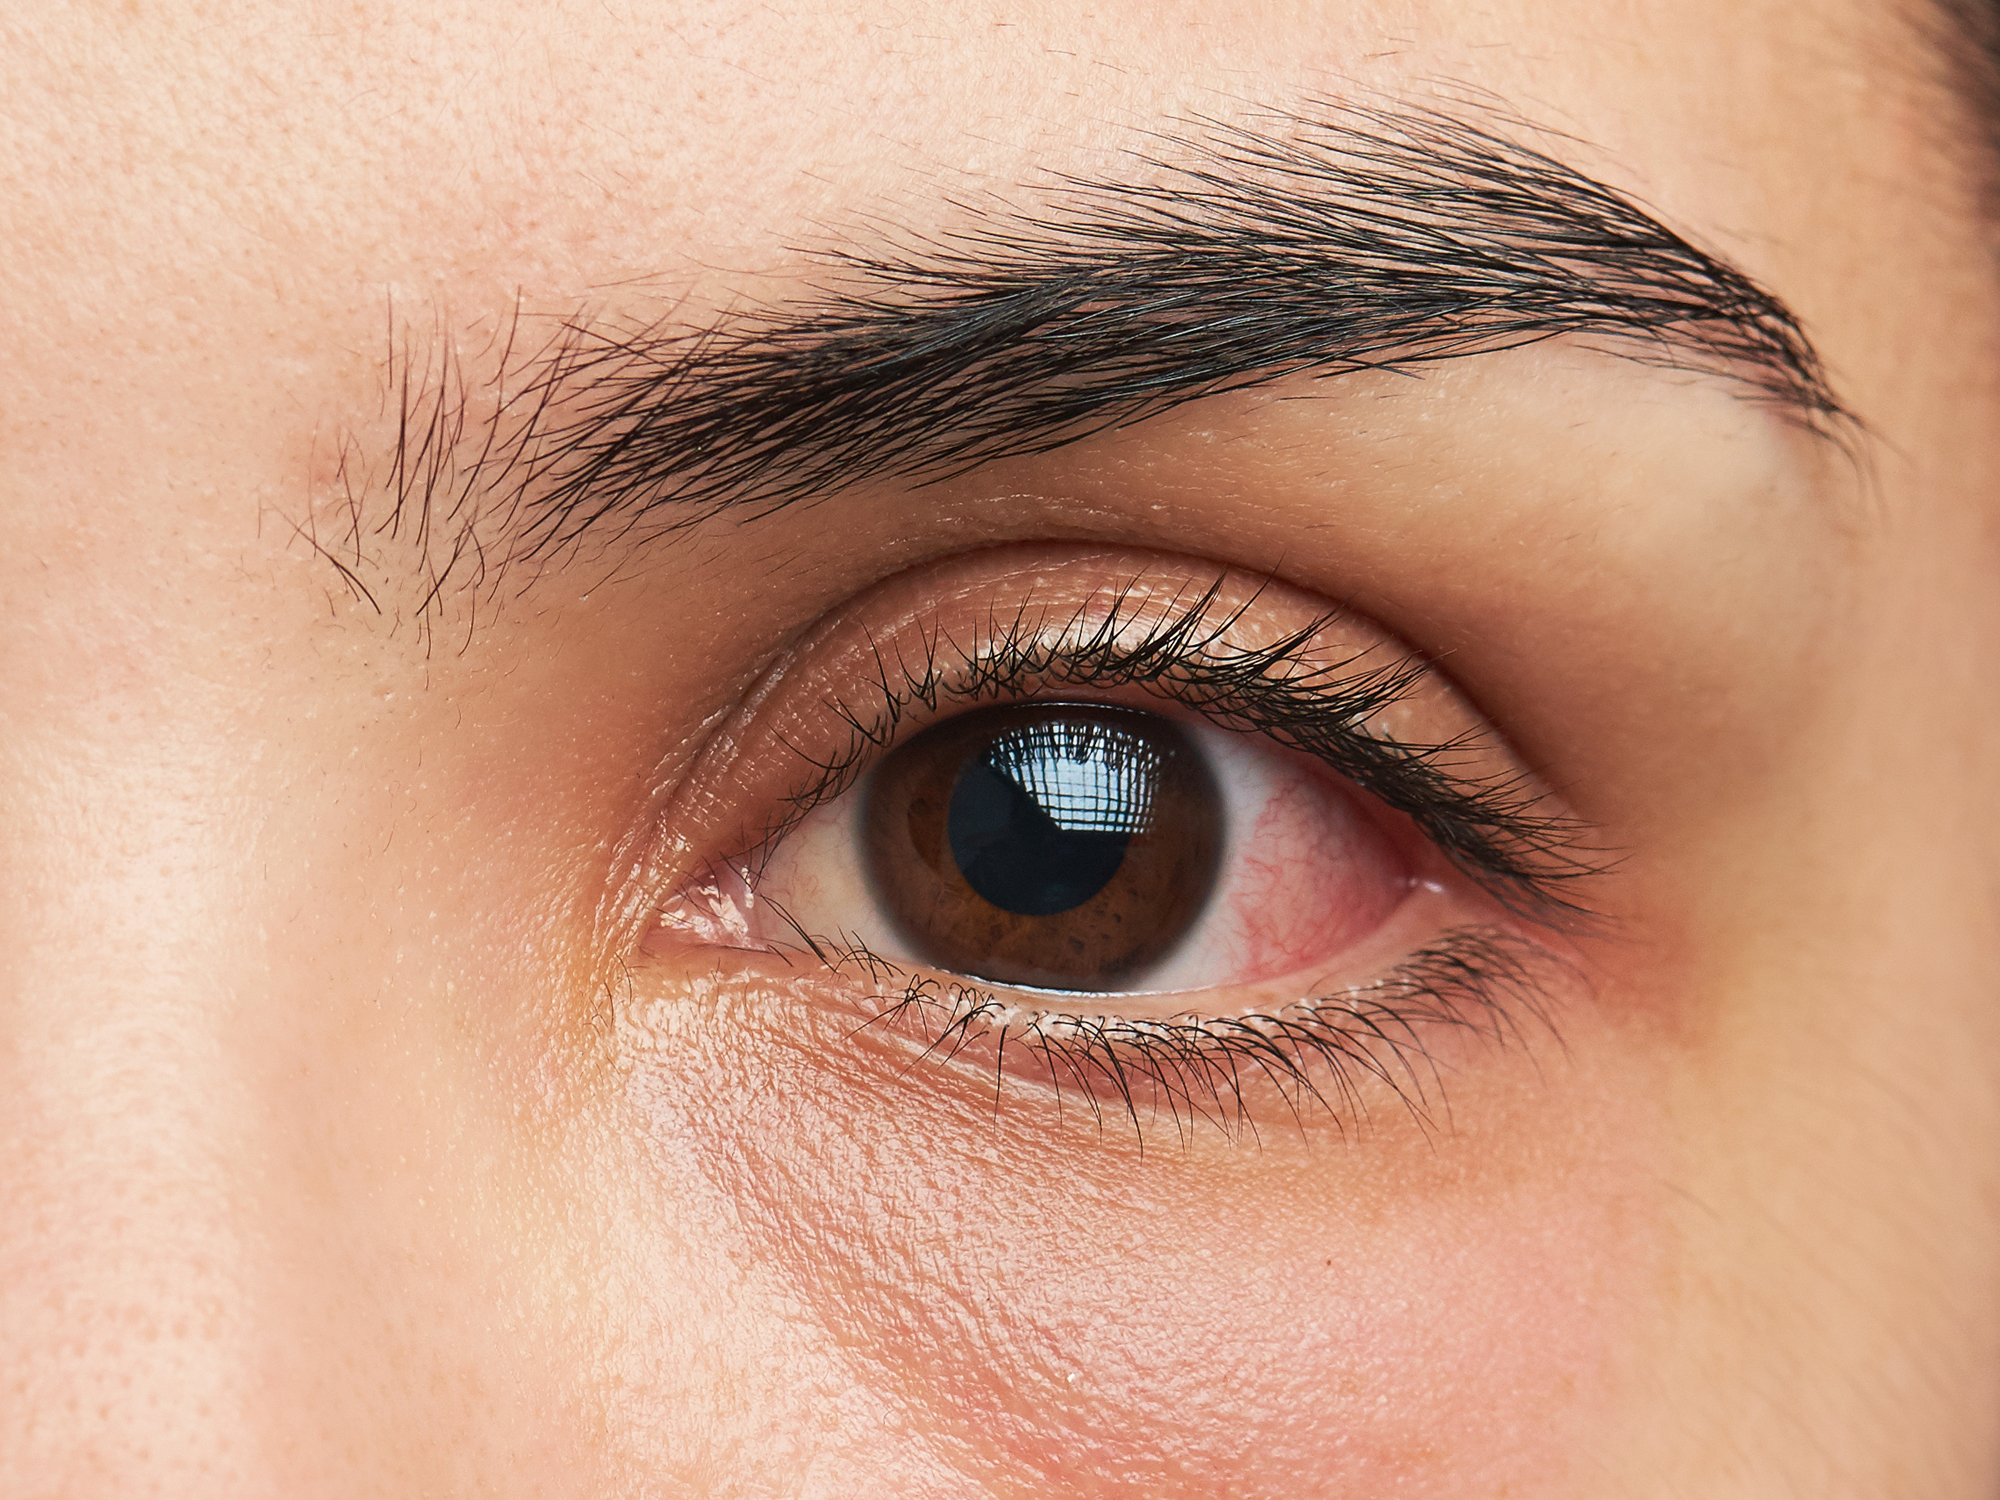 Are your eye symptoms serious? Here’s how to tell